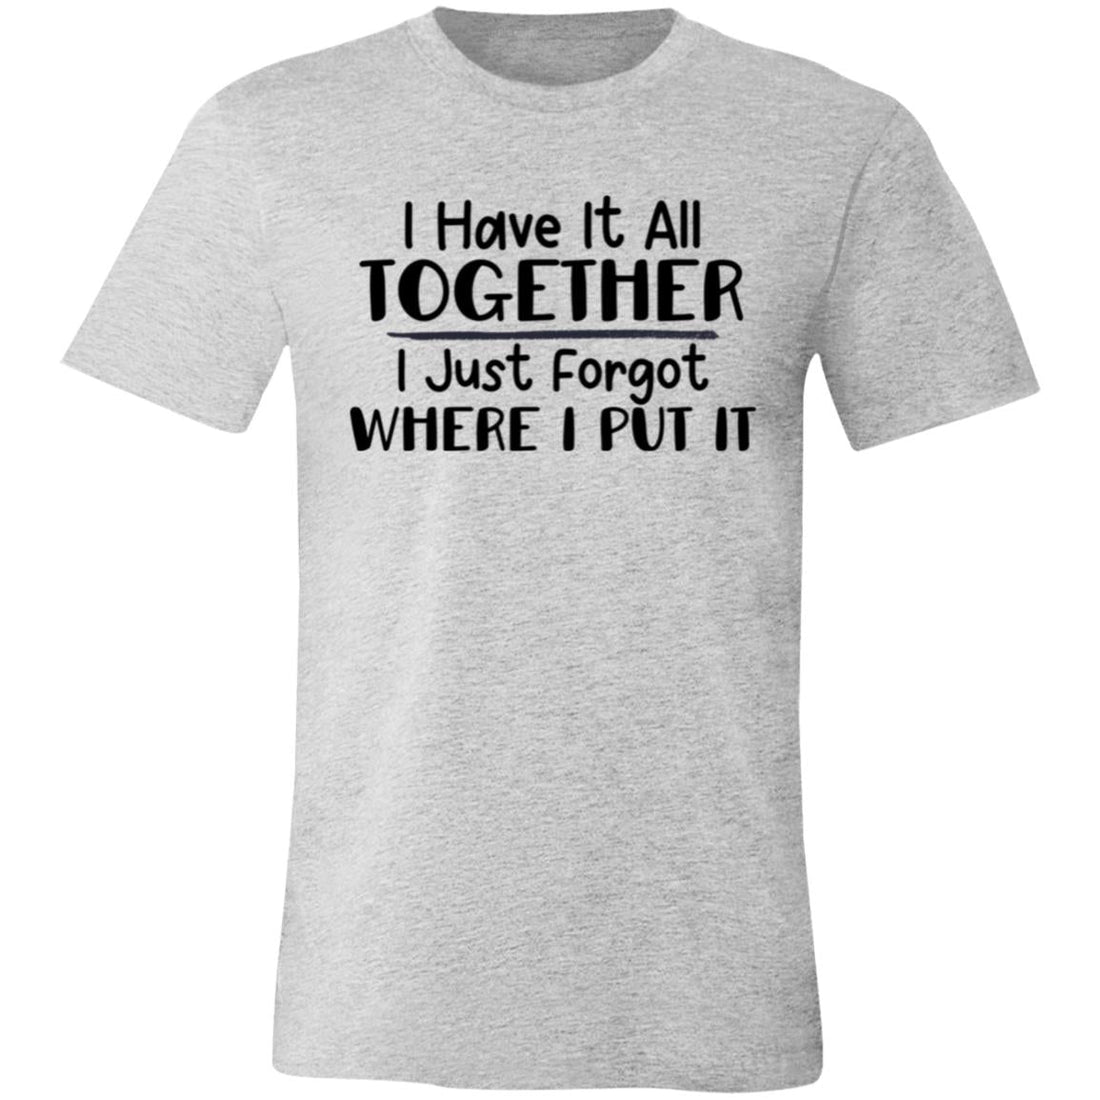 Have It All Together Unisex Jersey Short-Sleeve T-Shirt - T-Shirts - Positively Sassy - Have It All Together Unisex Jersey Short-Sleeve T-Shirt